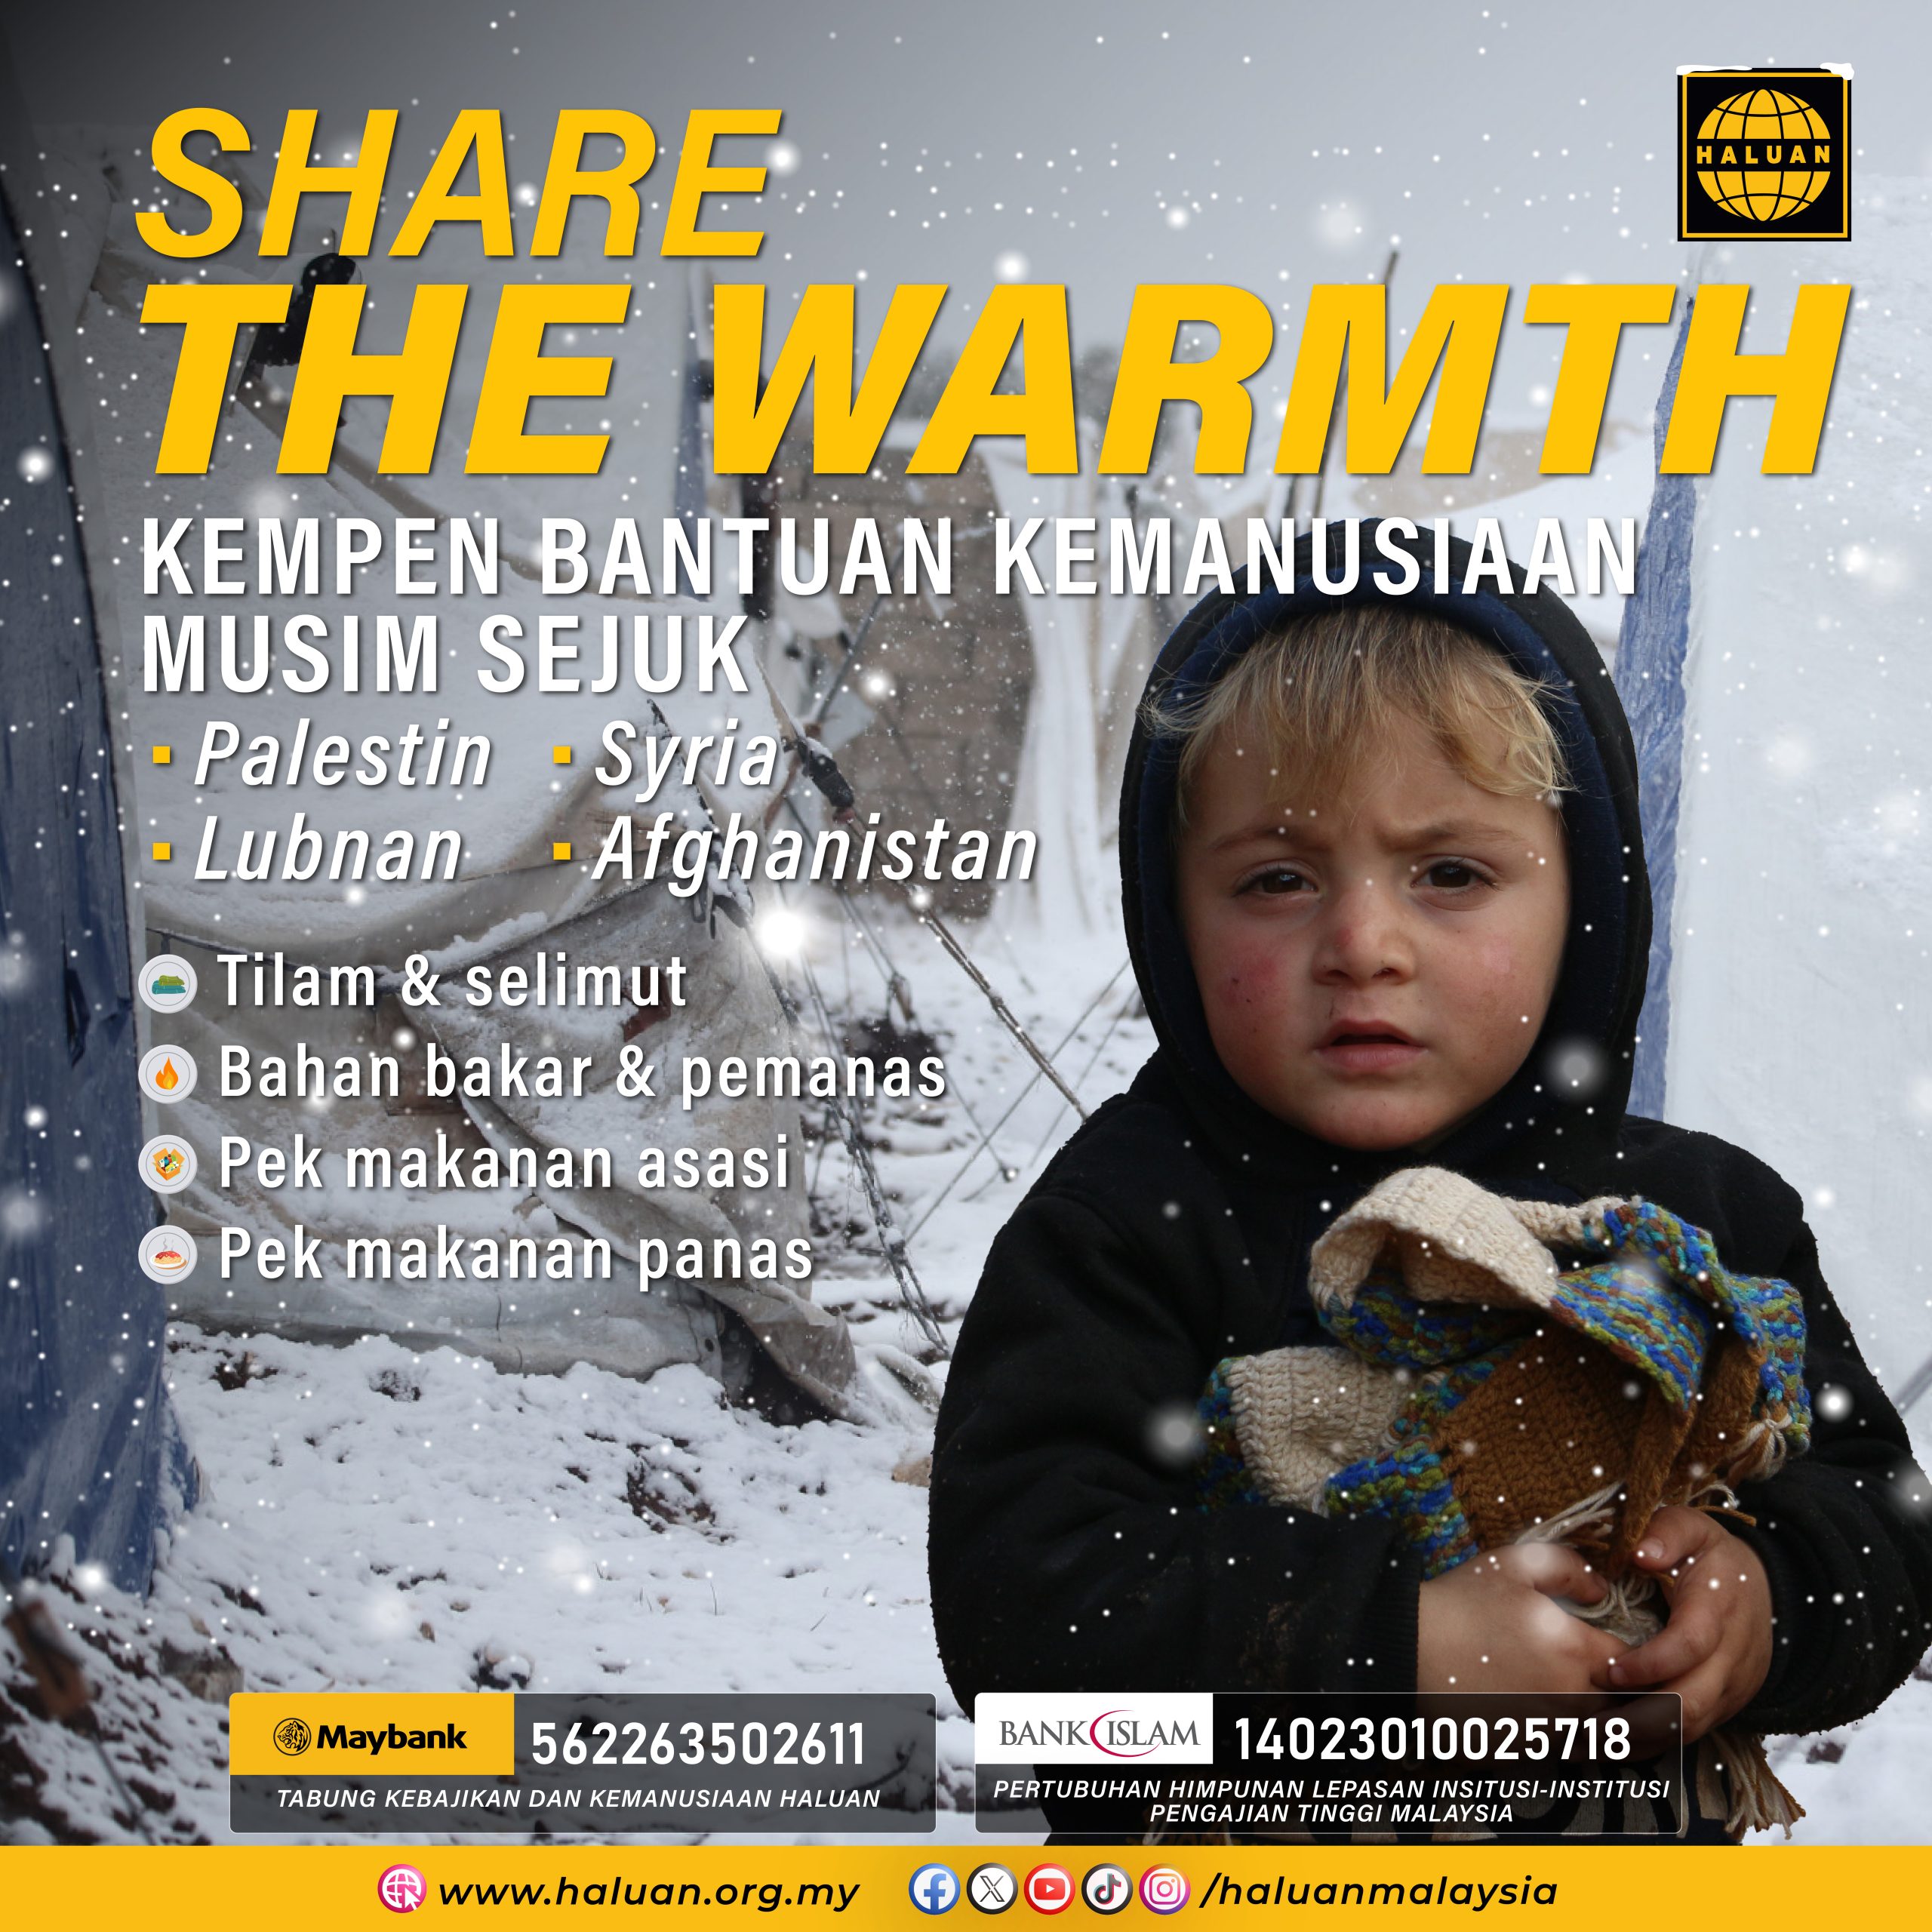 Share The Warmth